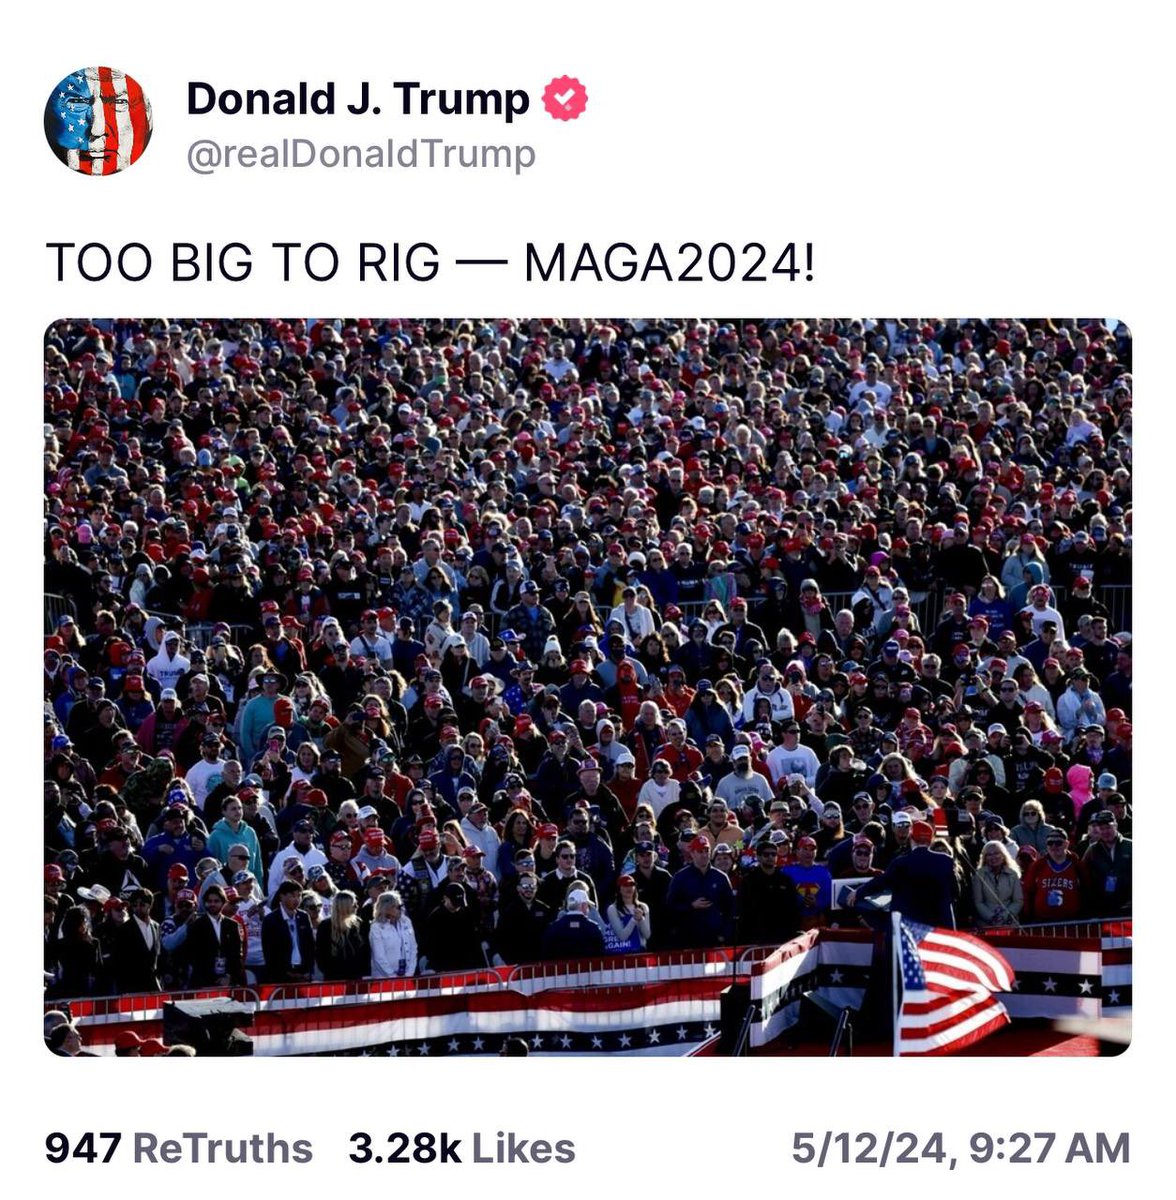 Has there ever been a larger rally in political history or is this it? #Trump2024 🇺🇸 #TooBigToRig